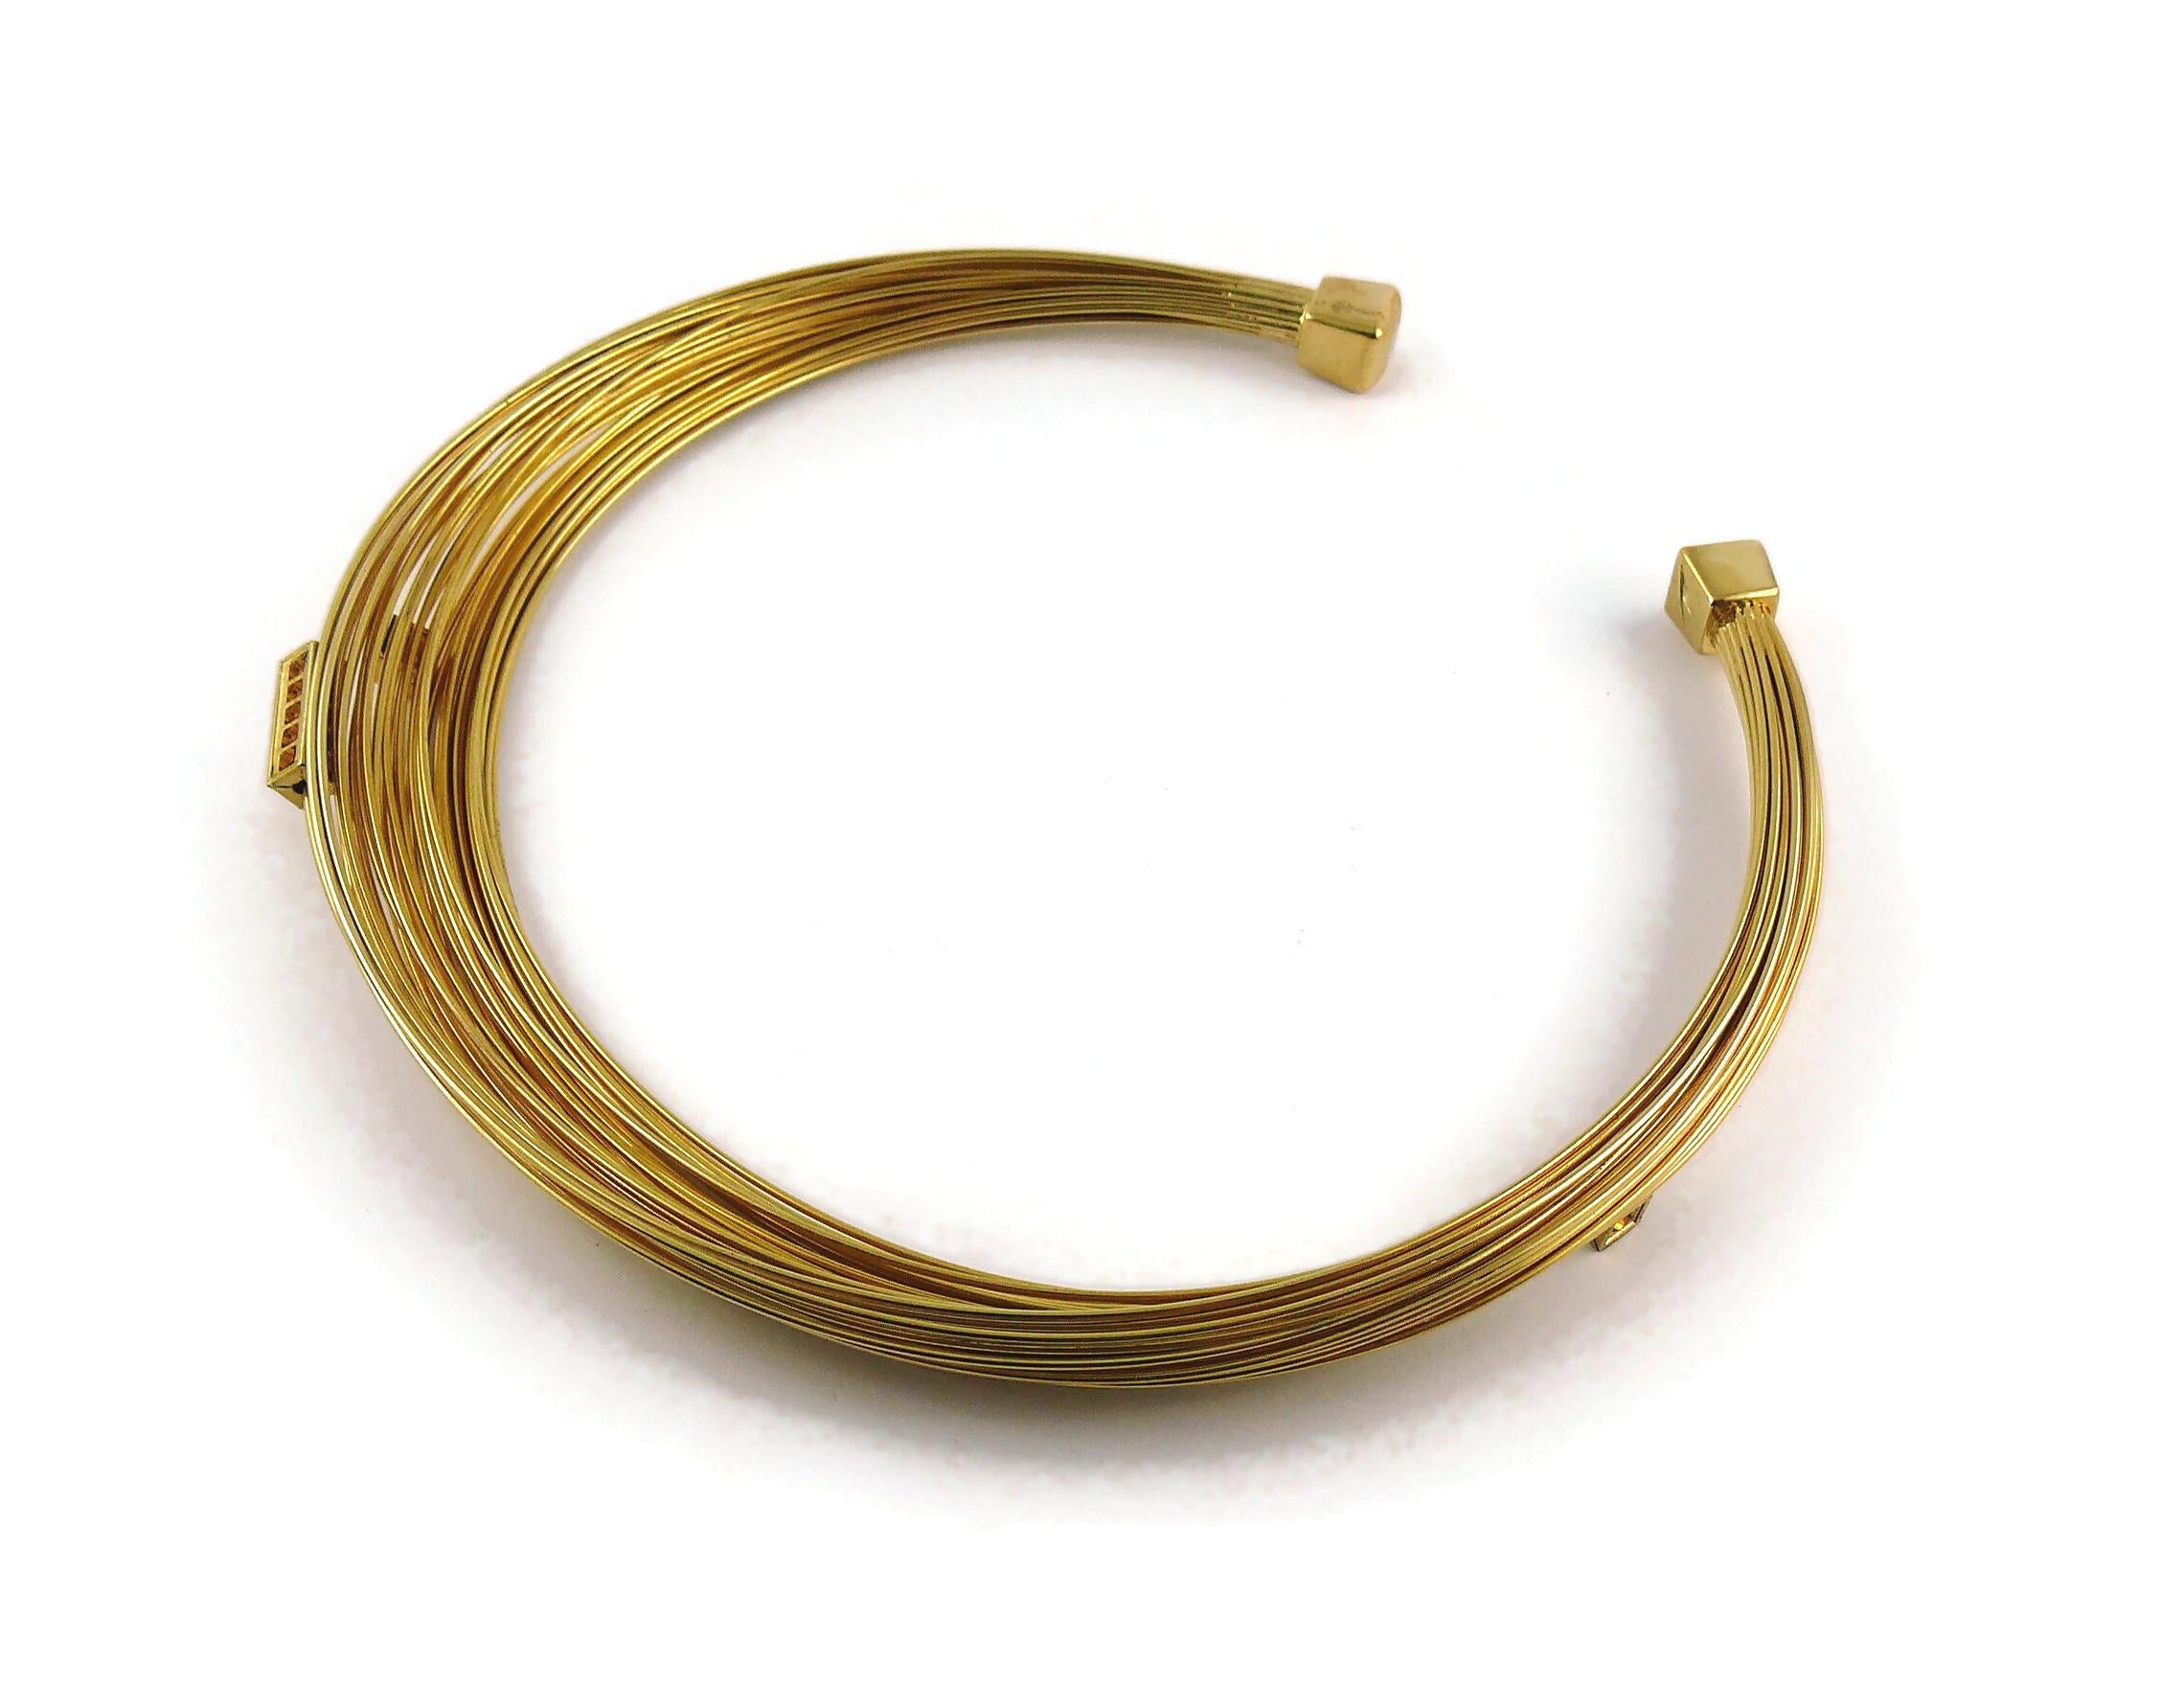 Thierry Mugler Gold Toned Bundled Wires Choker Necklace For Sale 4